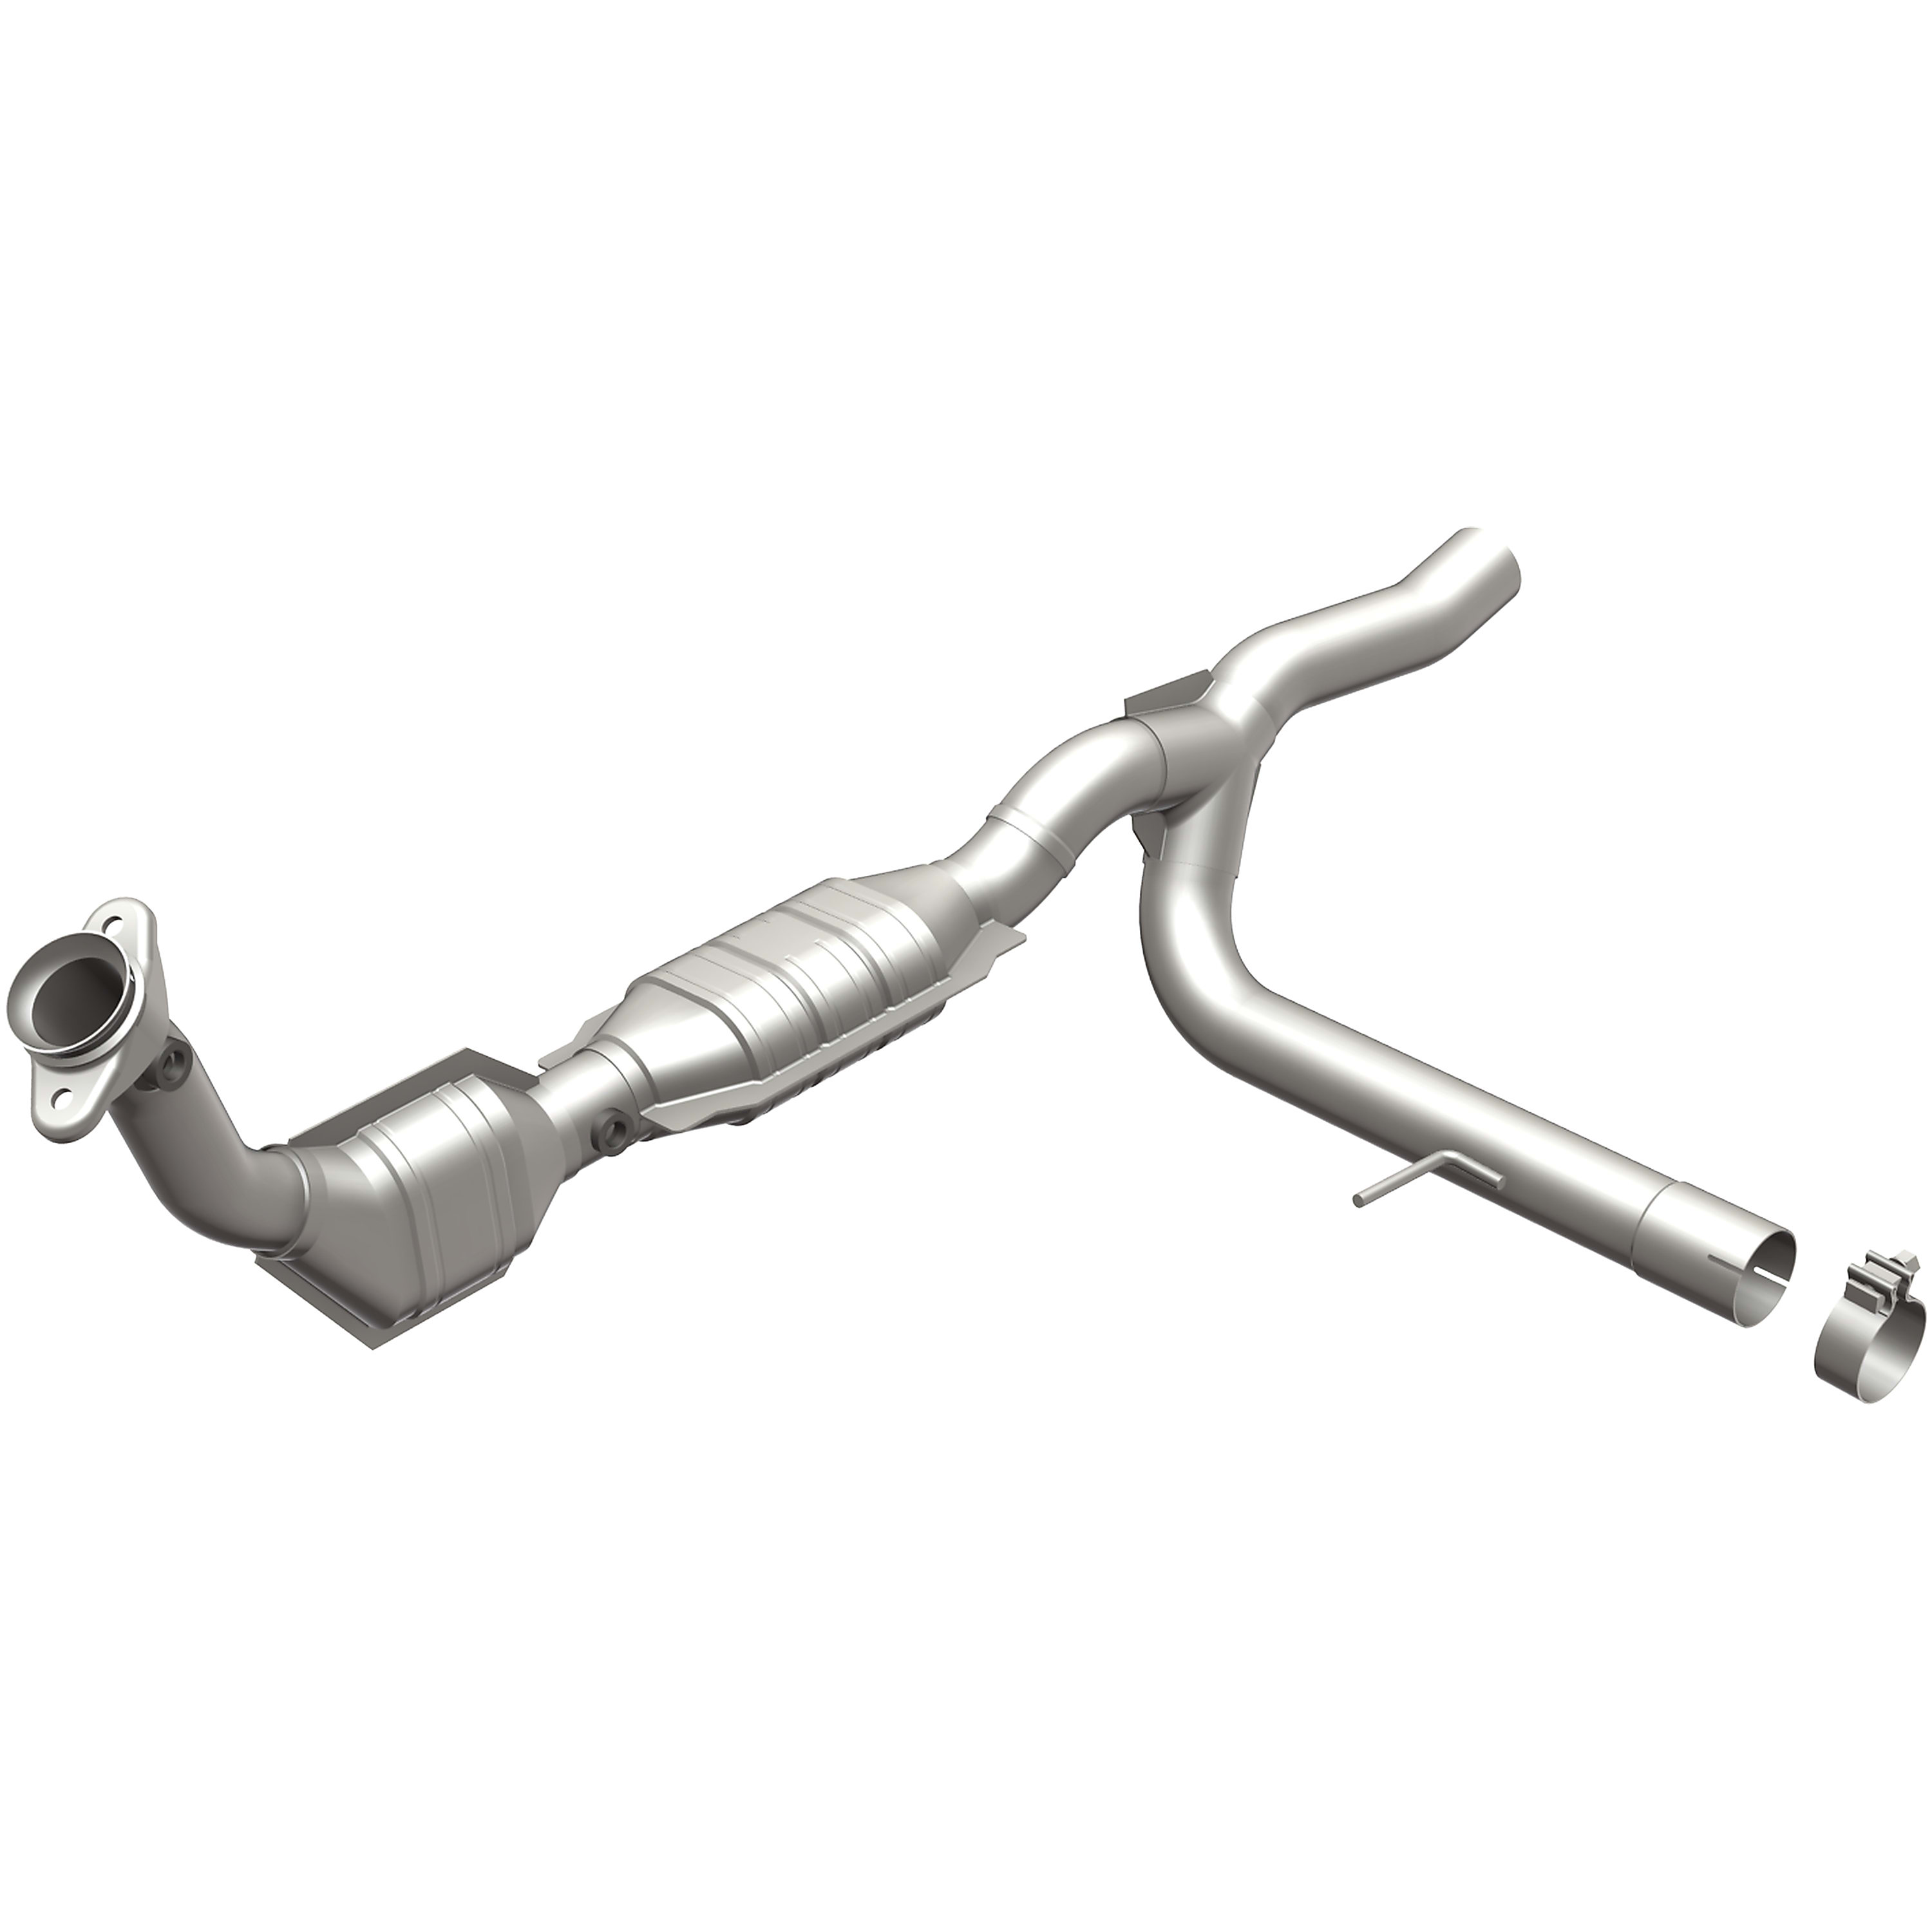 2005 Ford F-150 Catalytic Converters from $174 | CarParts.com 2005 Ford F150 Catalytic Converter California Legal